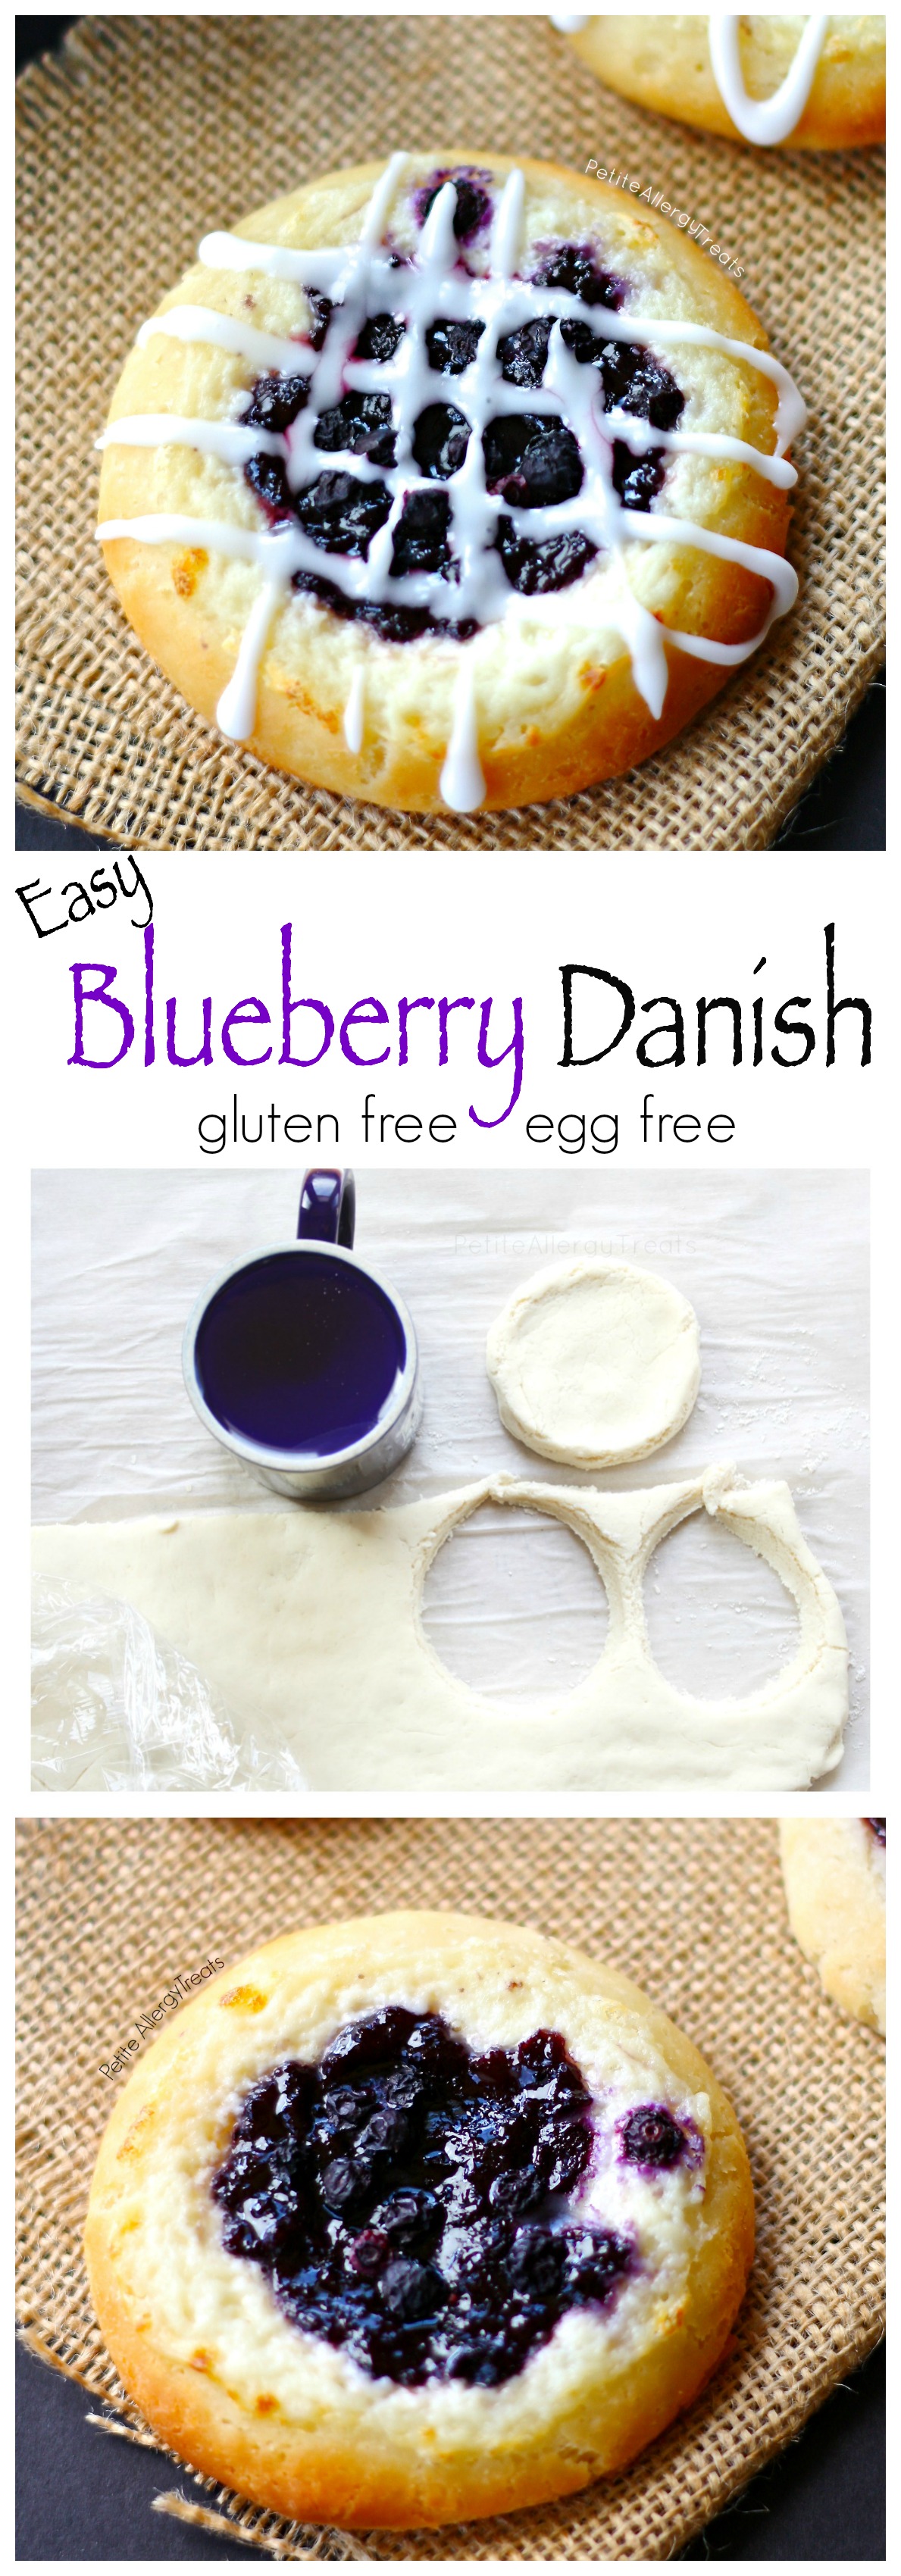 Blueberry Cheese Danish (gluten free egg free)- Delicious blueberry and mascarpone cheese danish. You'd never know it's gluten free.